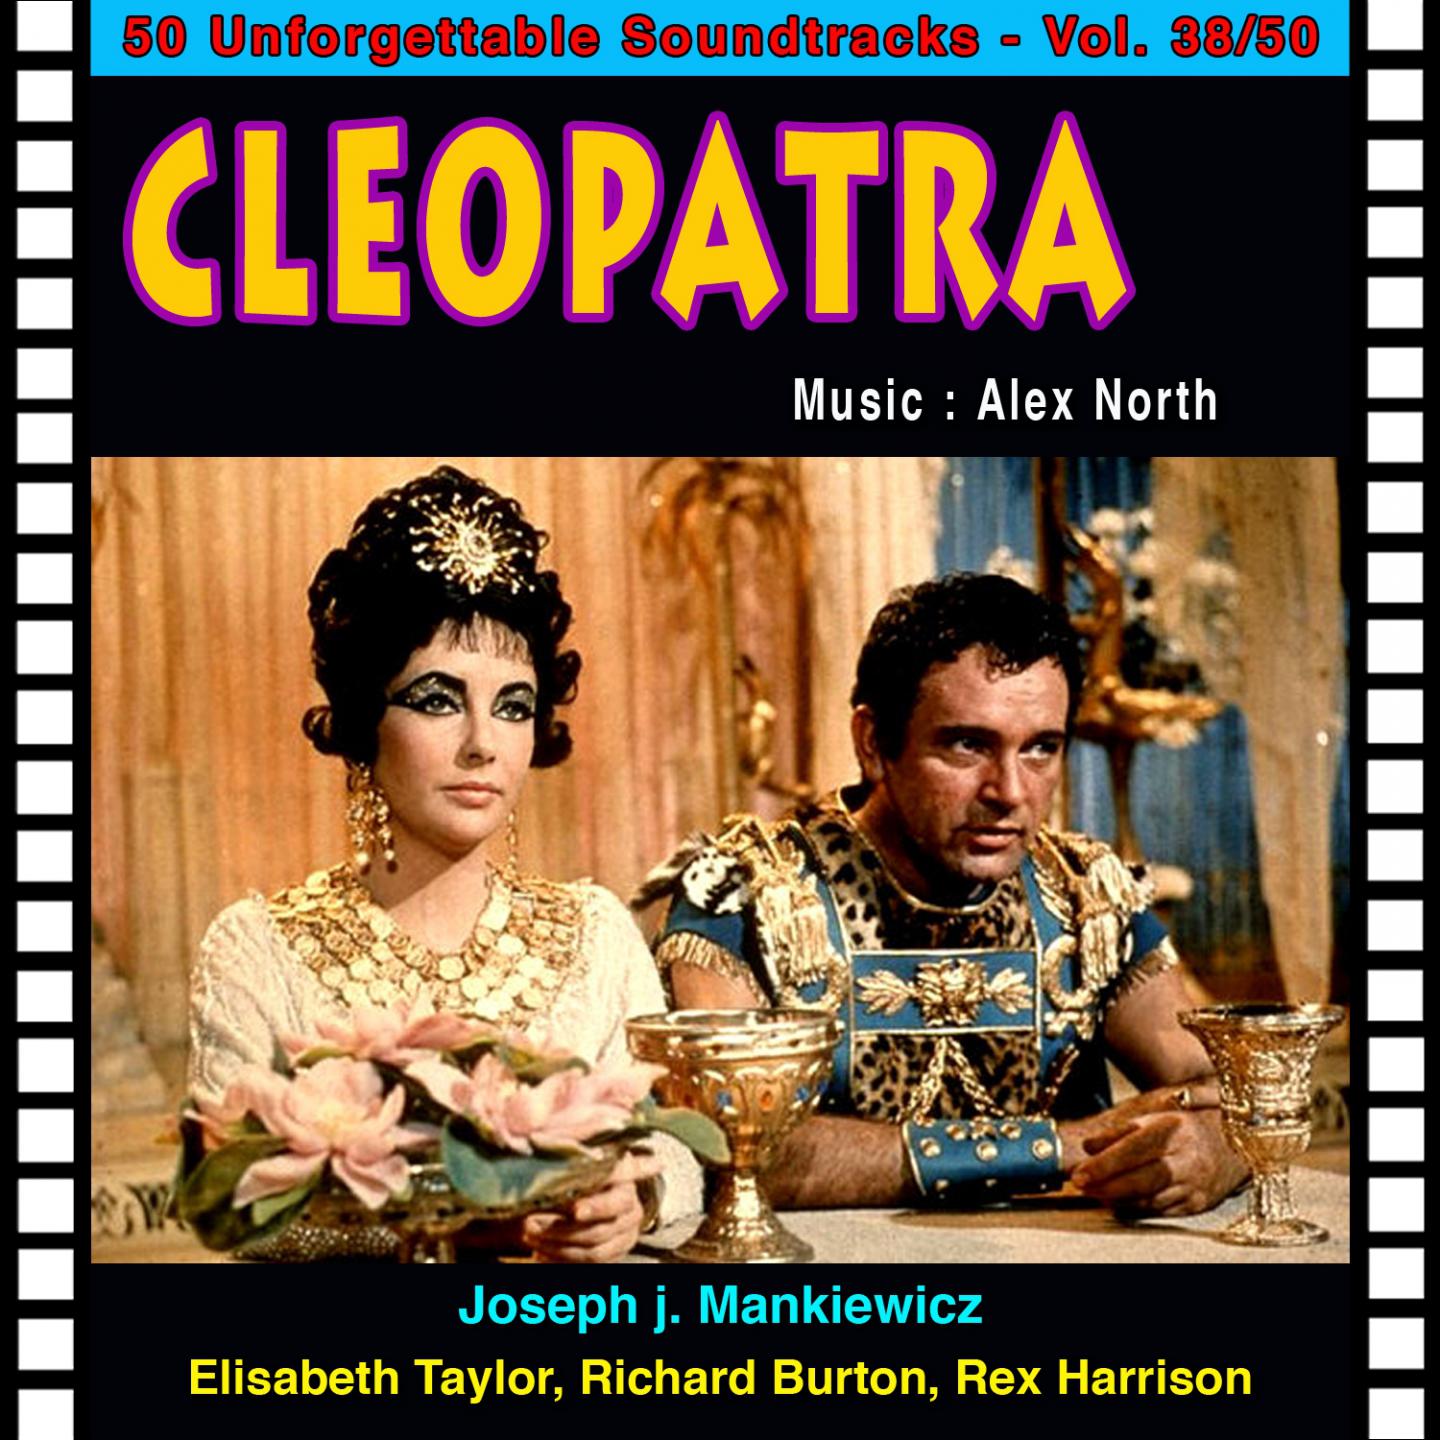 The Fire Burns, the Fire Burns... Cle opatre  Cleopatra